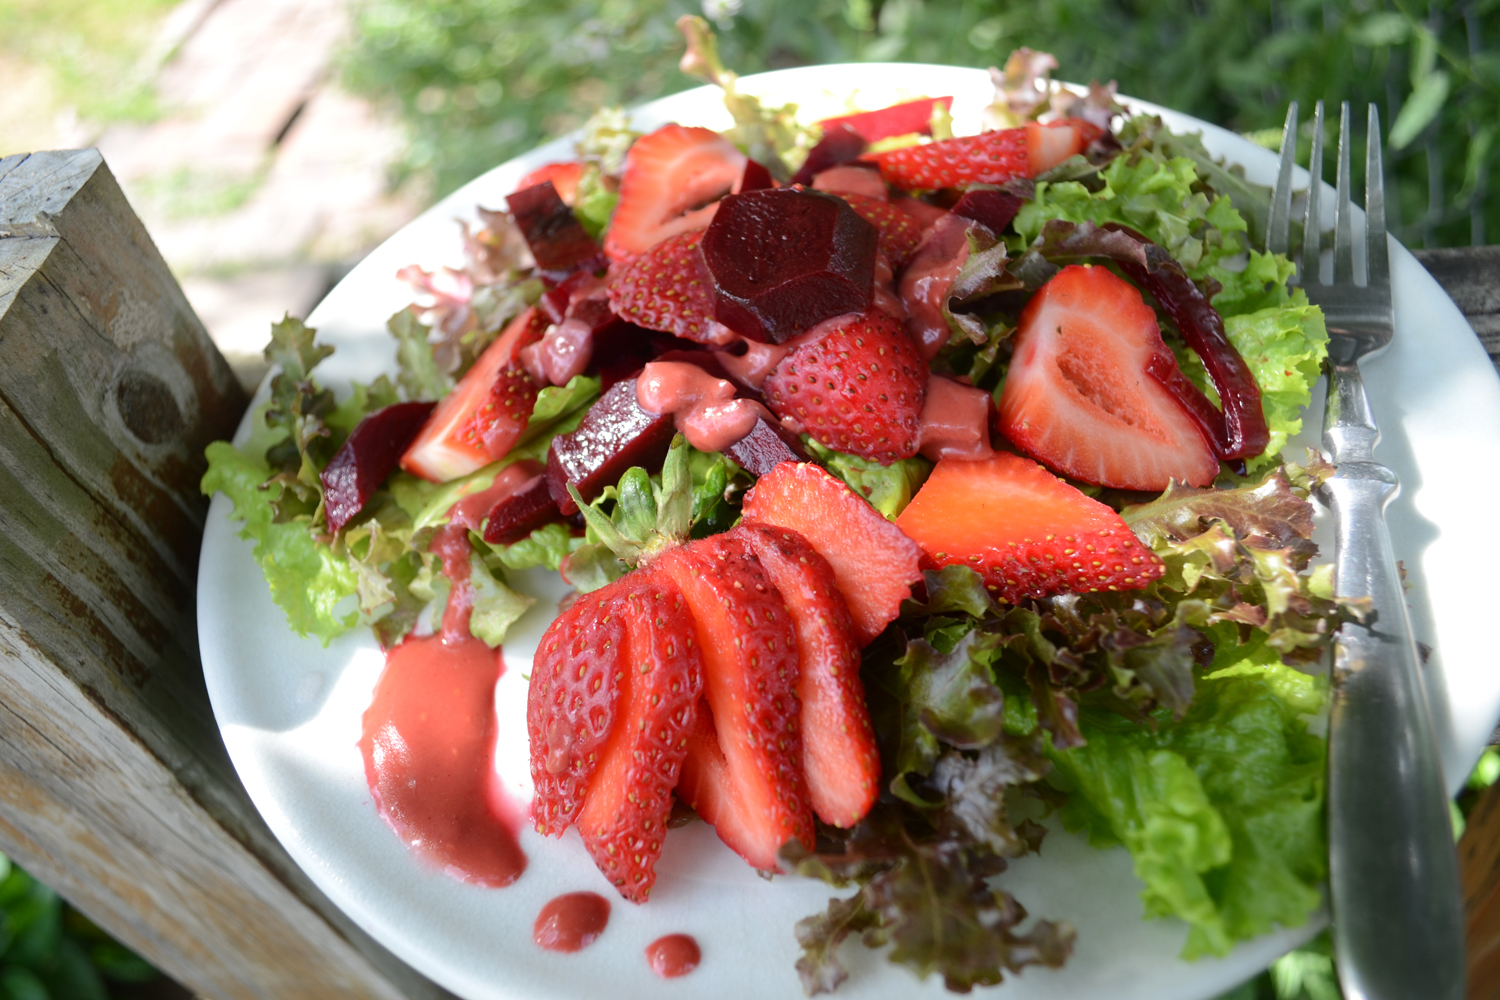 Strawberry and pickled beet salad recipe